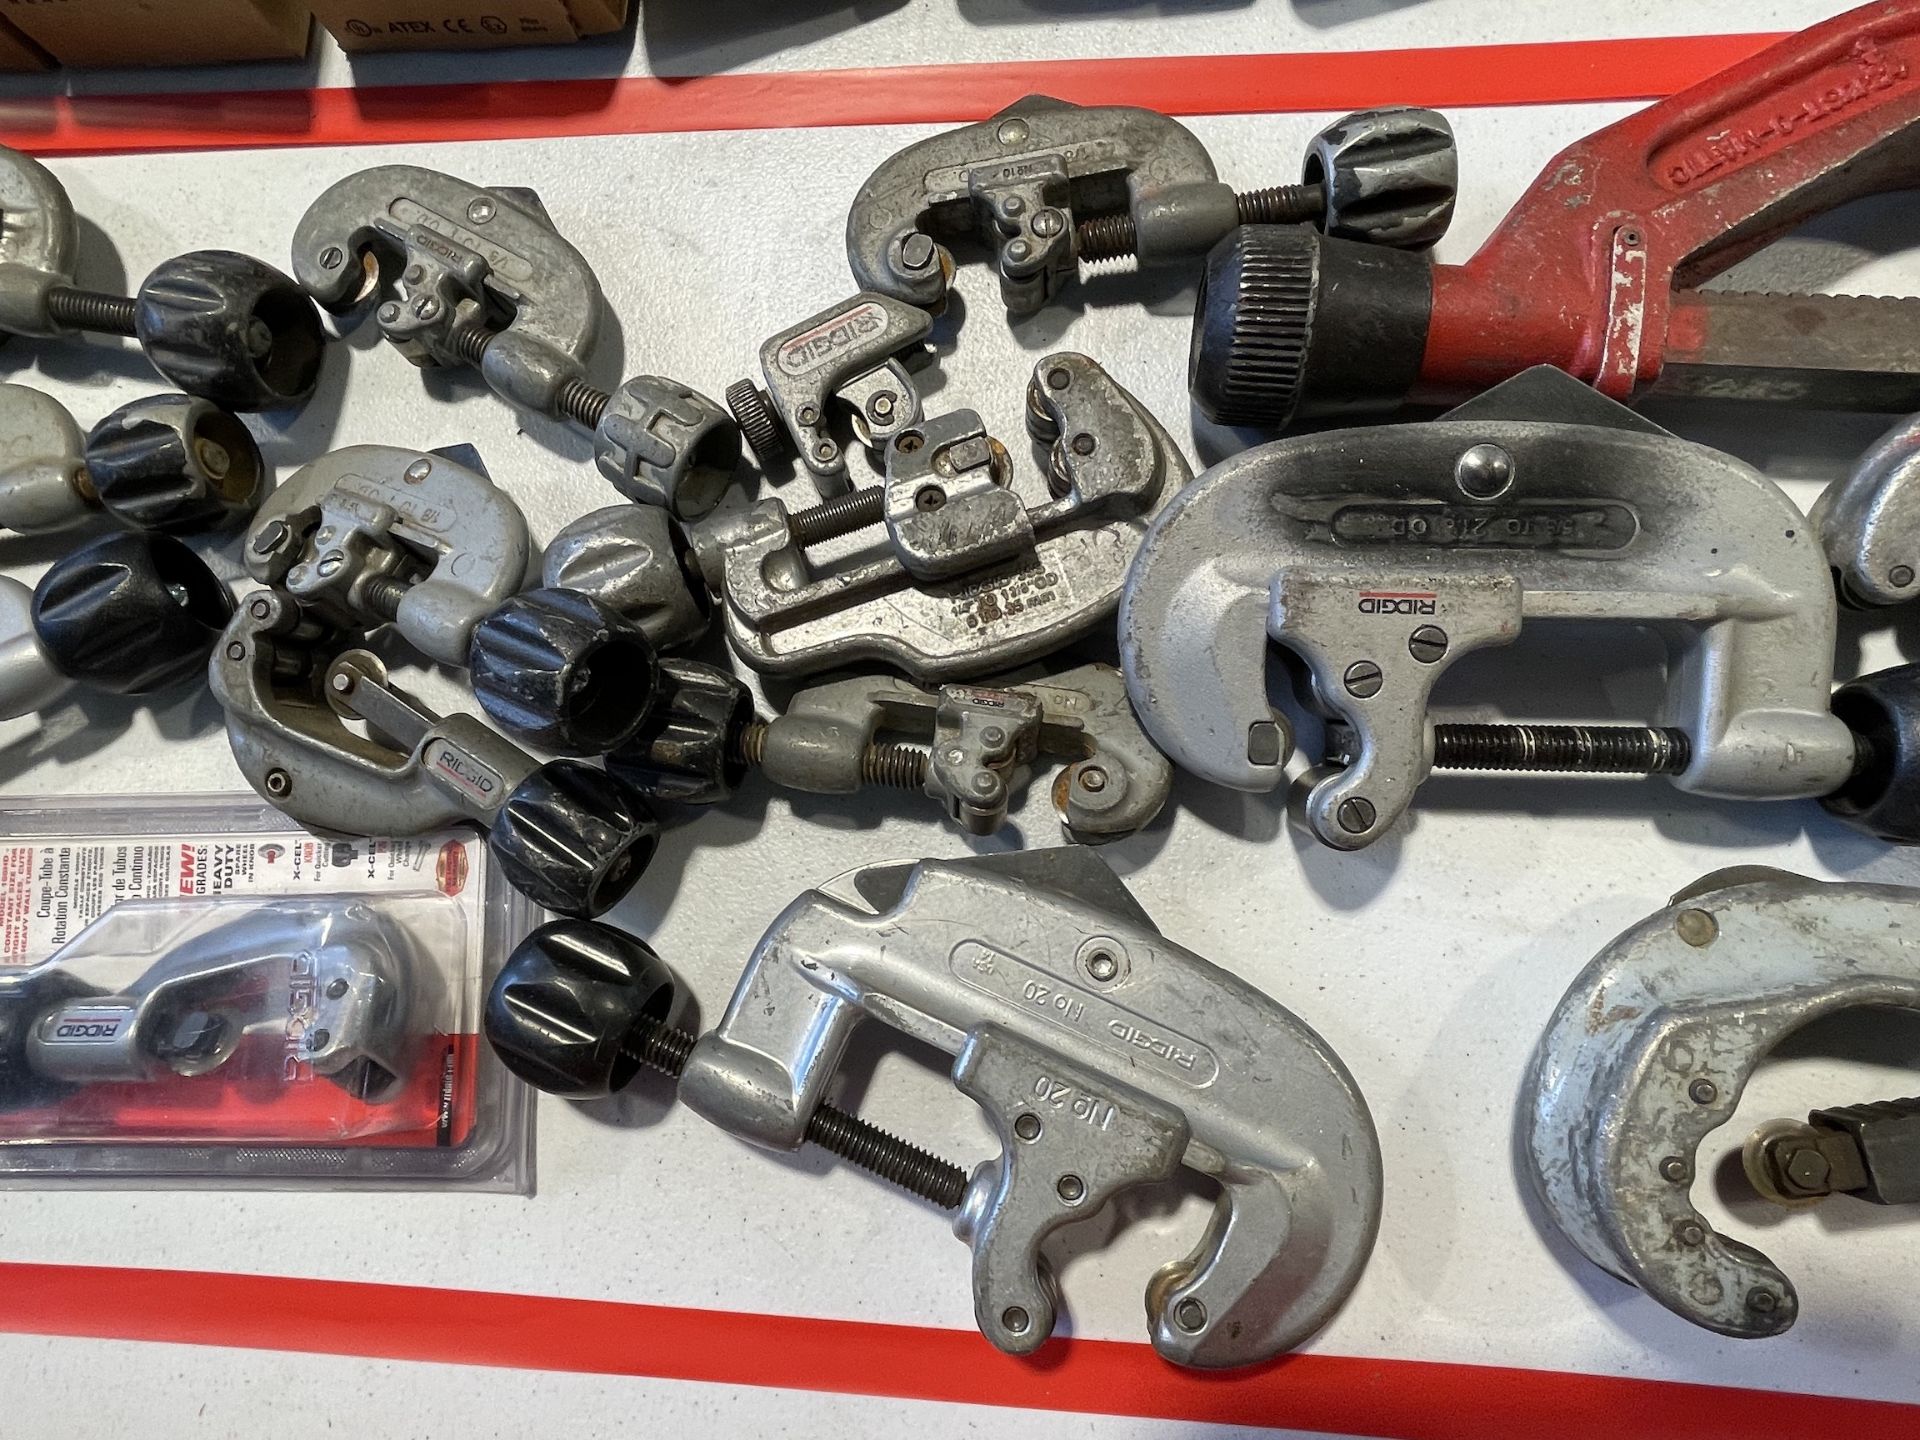 Lot of Swing Tubing Cutters - Upland - Image 3 of 8